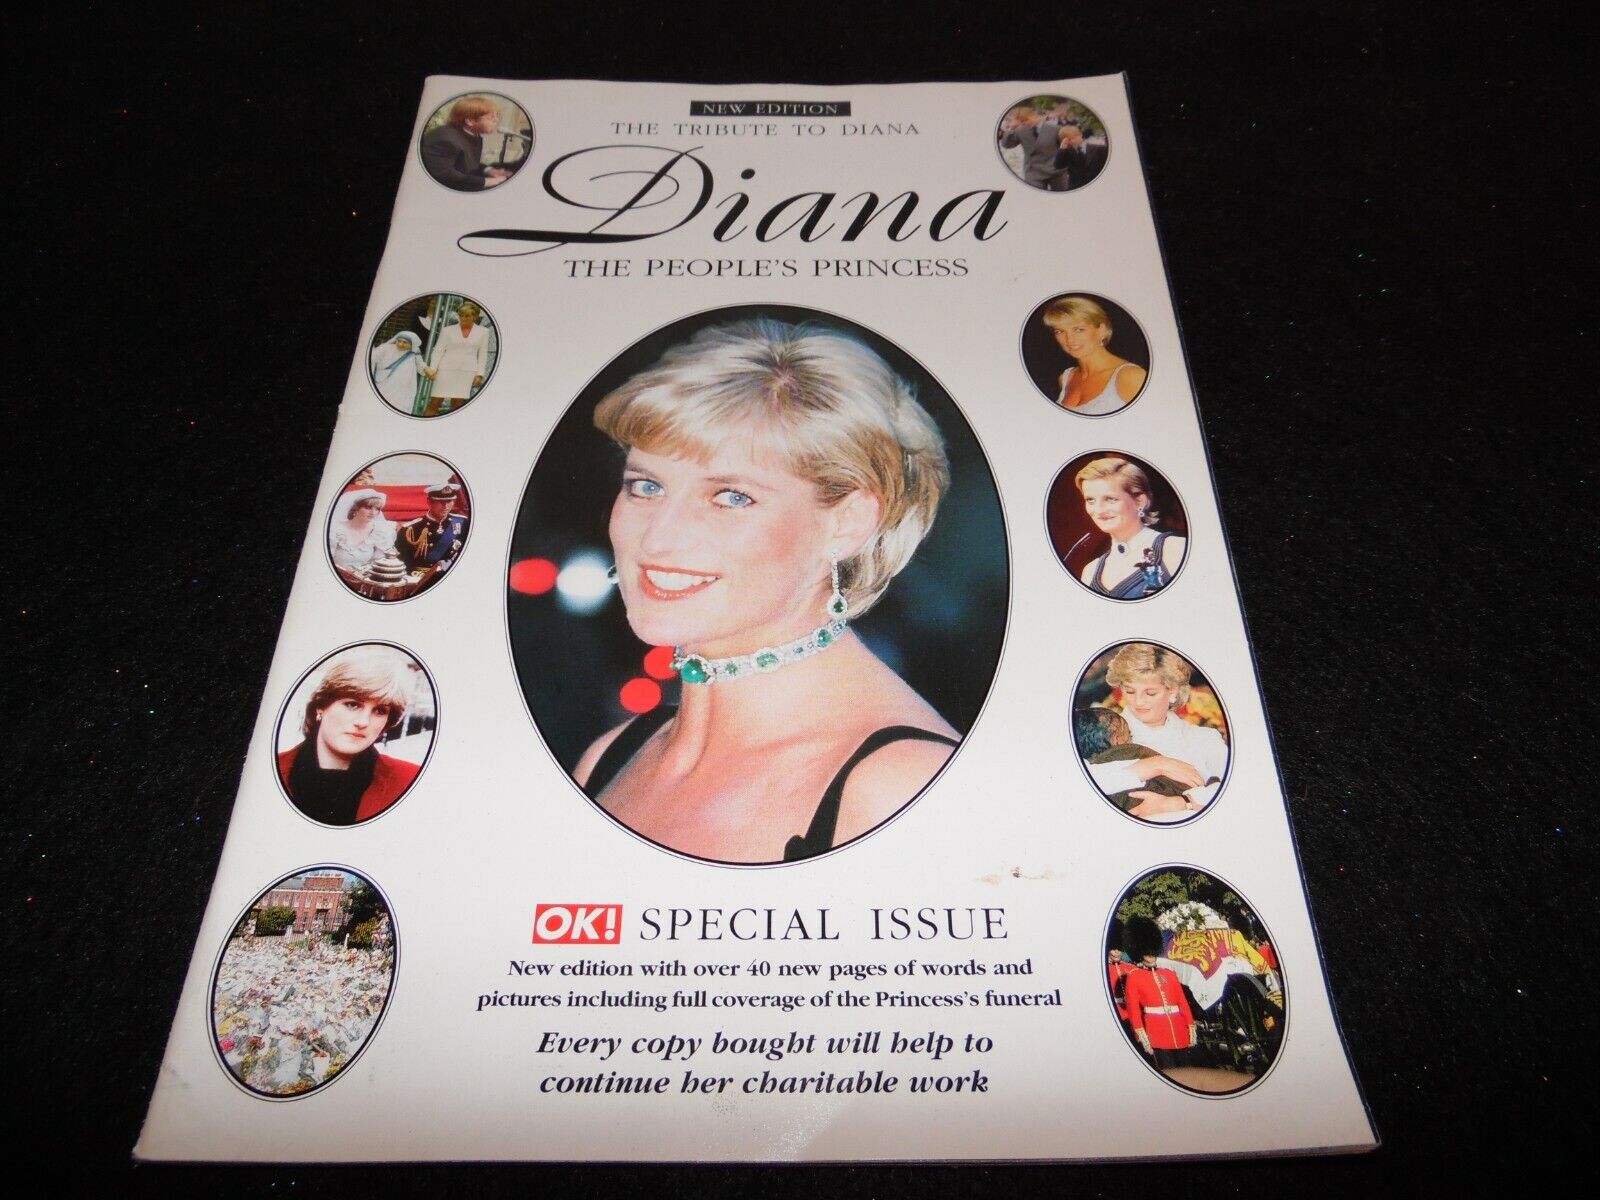 OK Special Issue The Tribute to Diana, The People\'s Princess 1997 New Edition